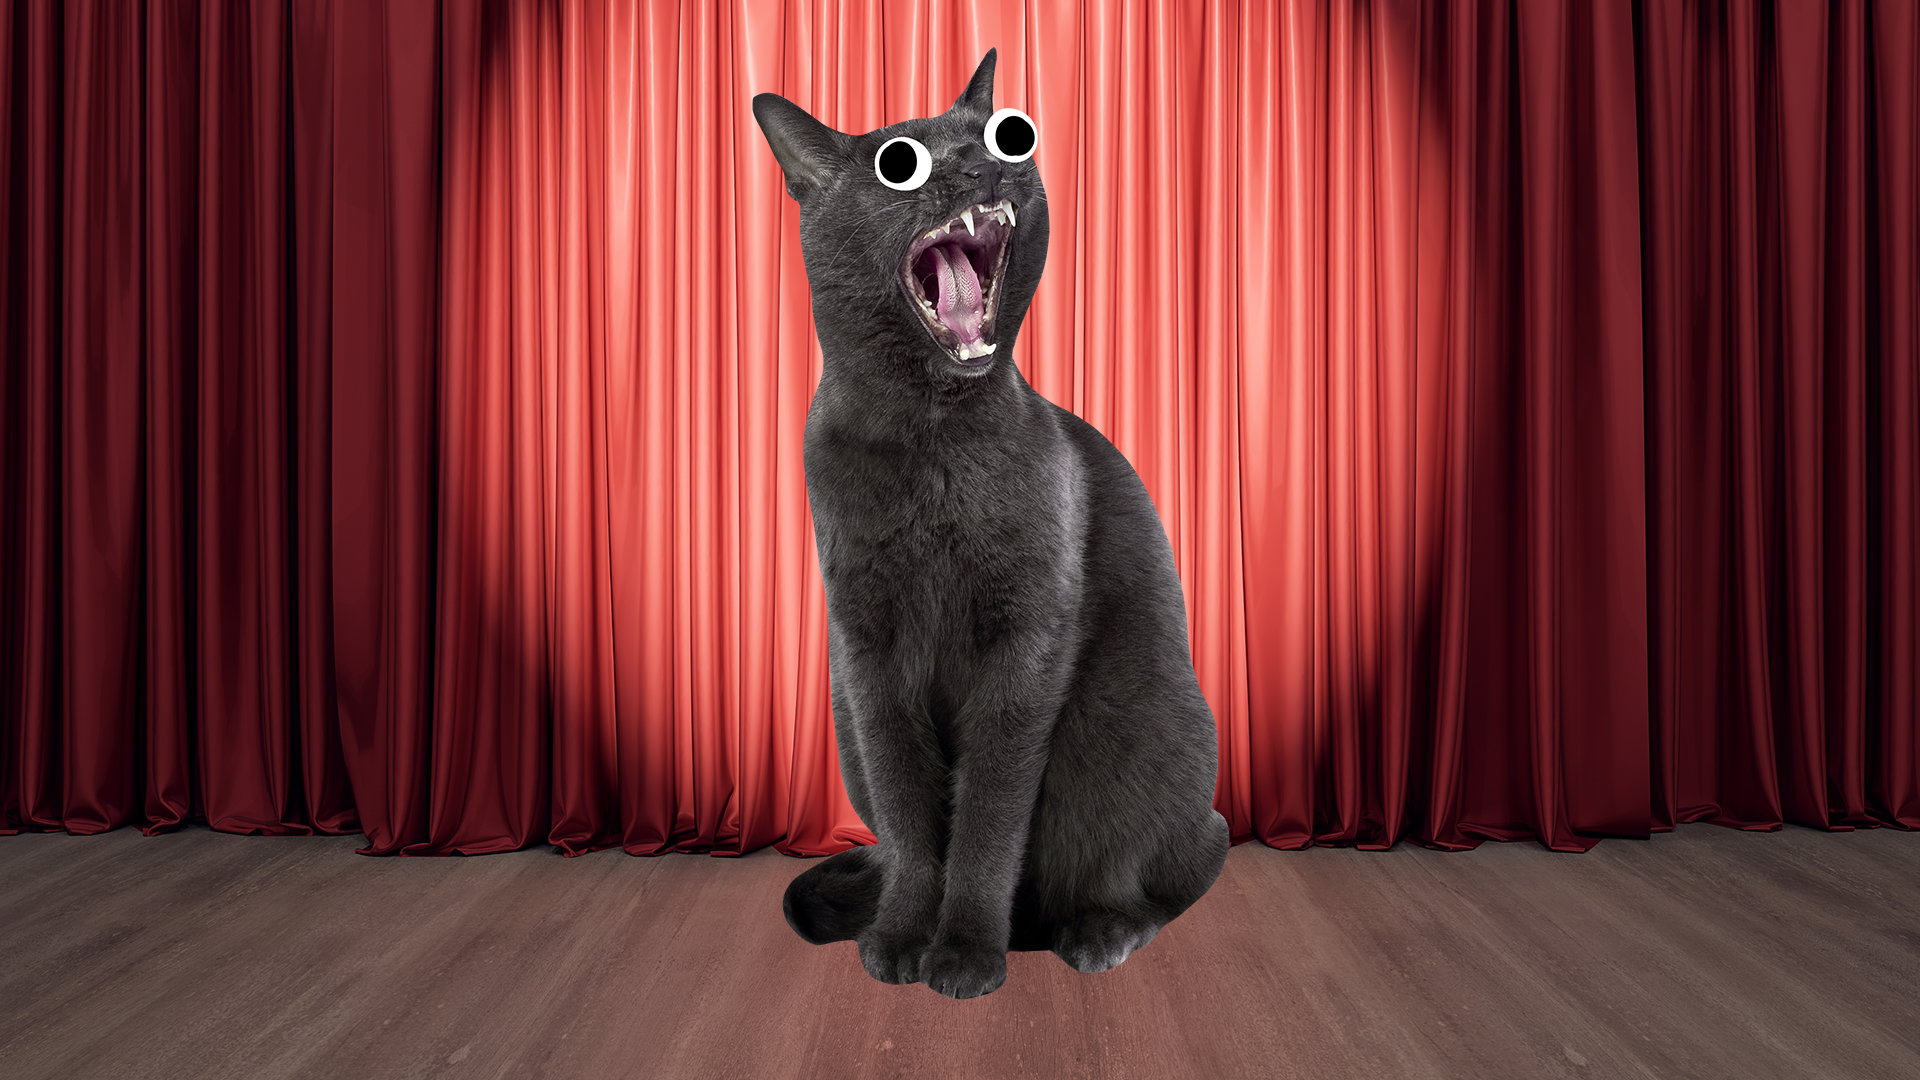 Screaming cat on curtain background 